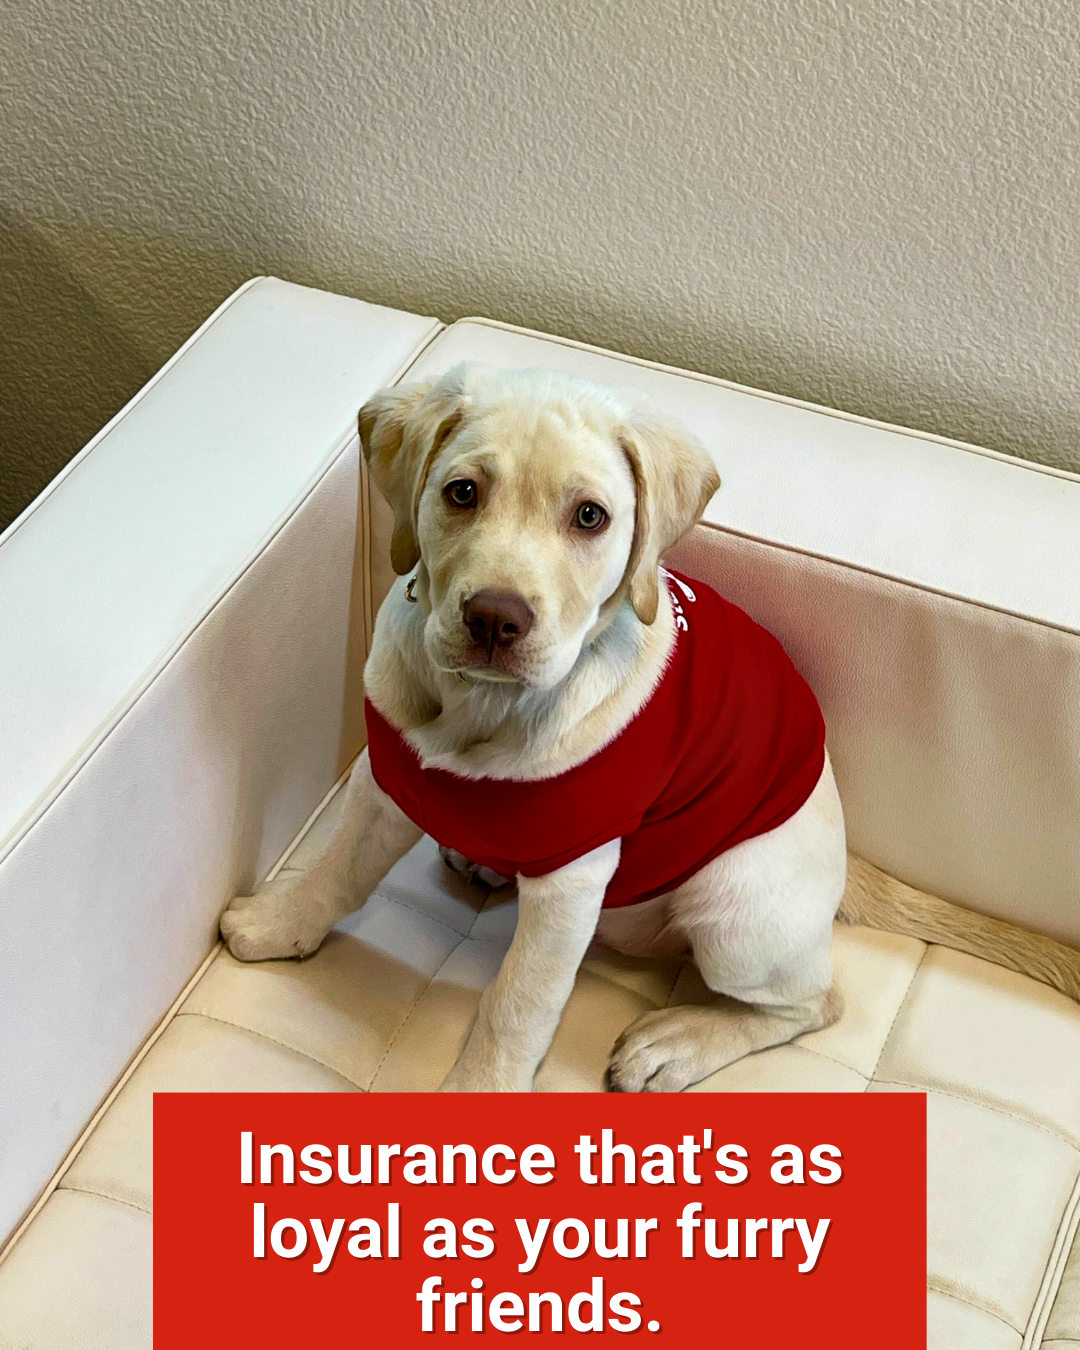 Call our  Hopkinsville office today for a free insurance quote! Michael Venable - State Farm Insurance Agent Hopkinsville (270)885-0063